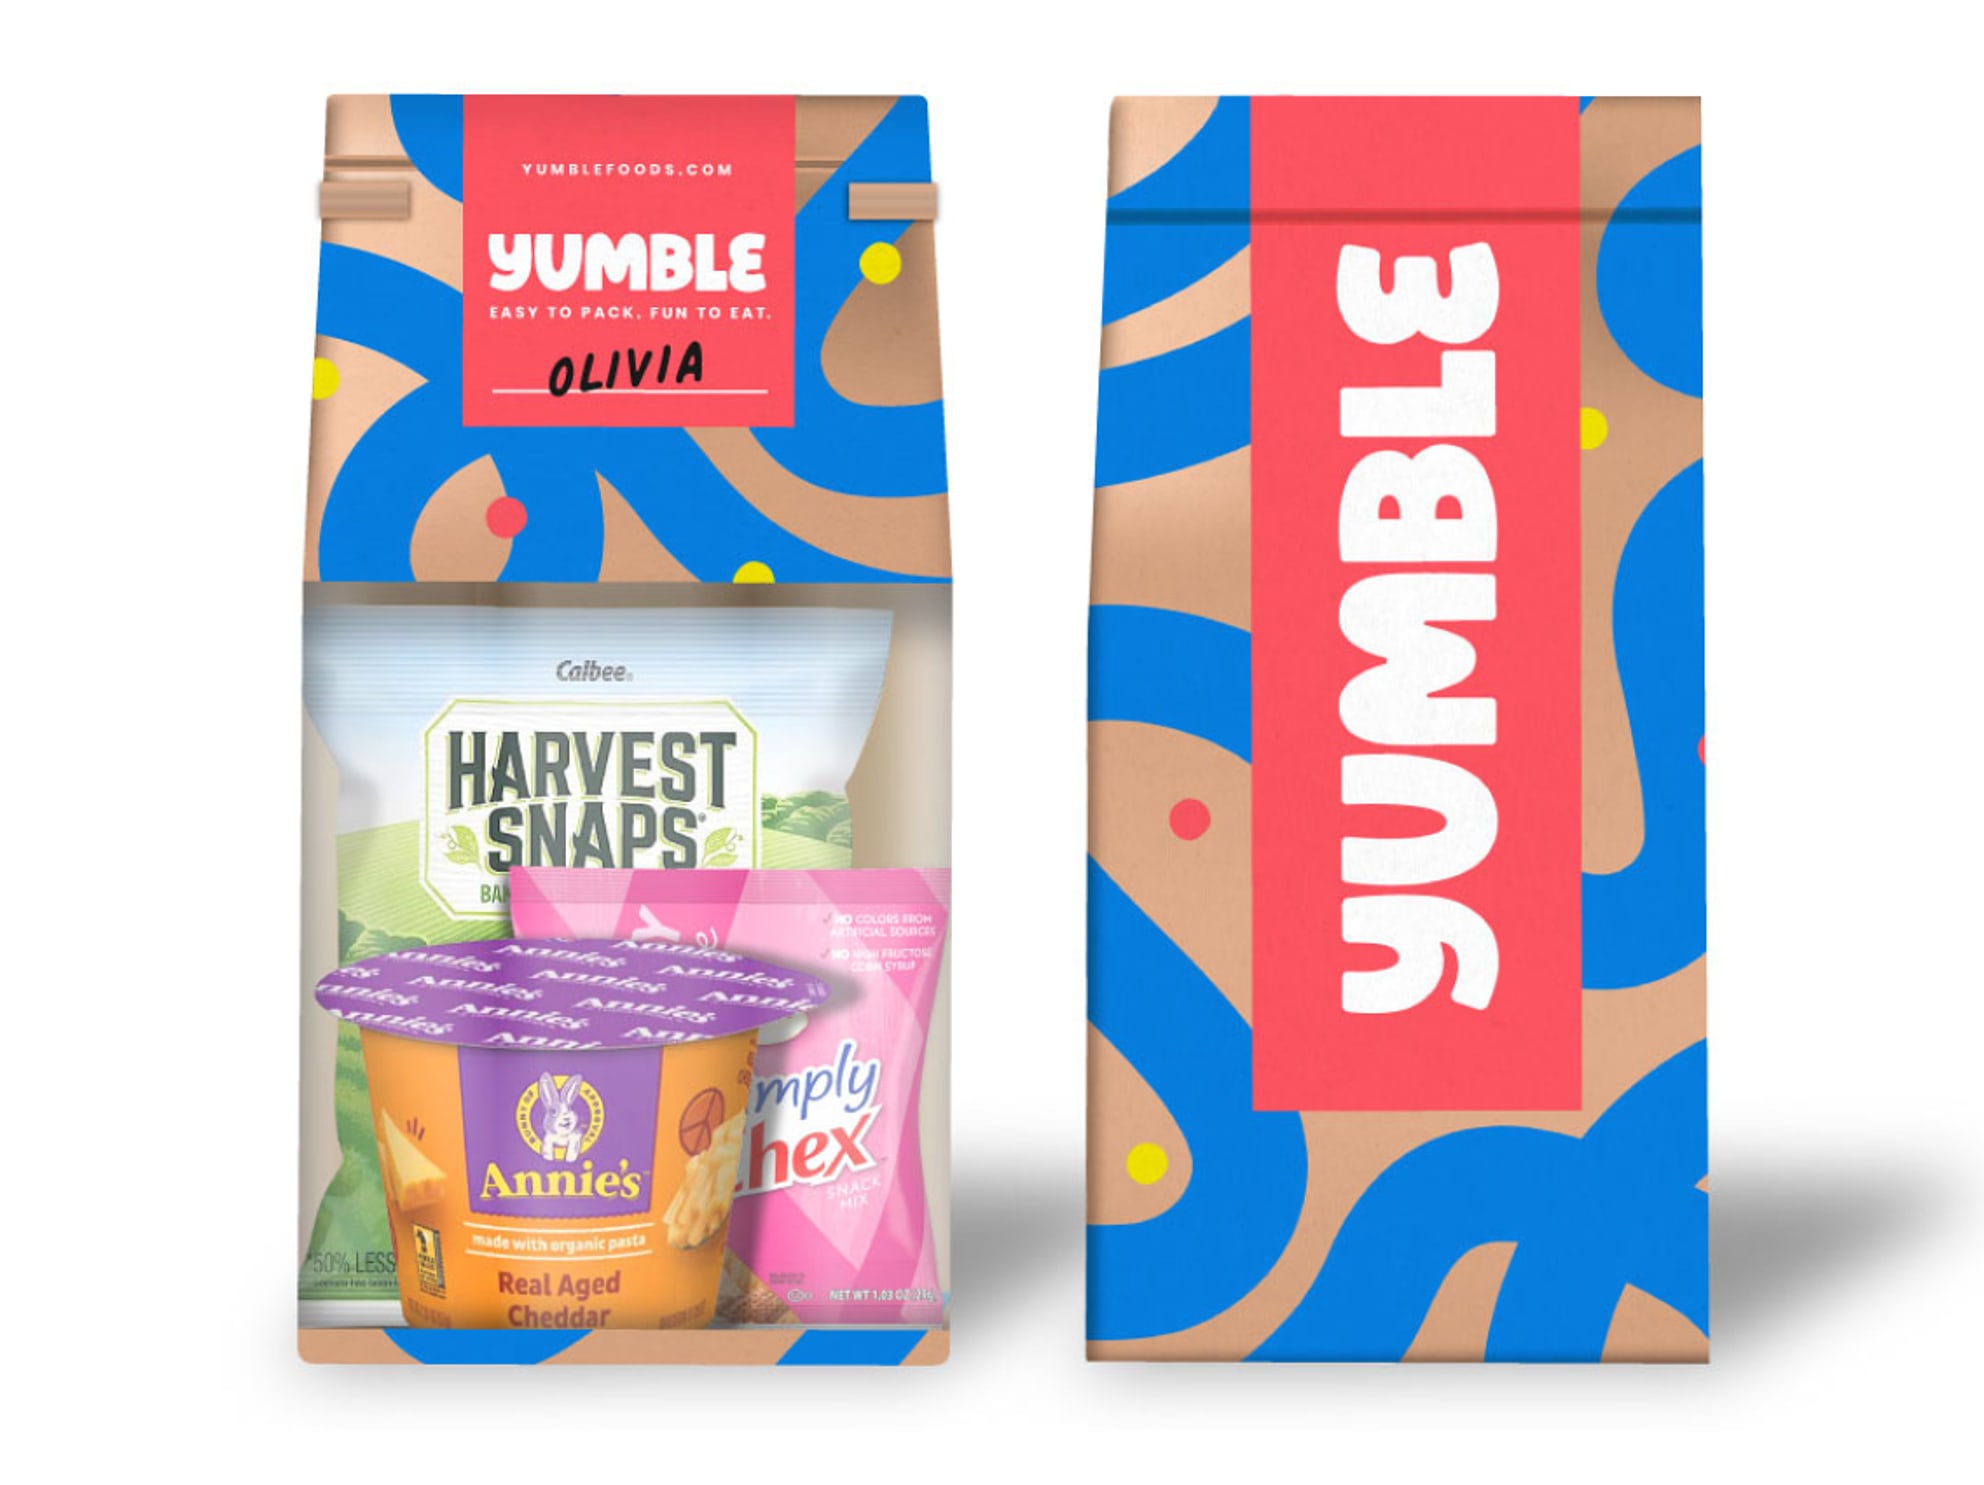 Yumble packaging